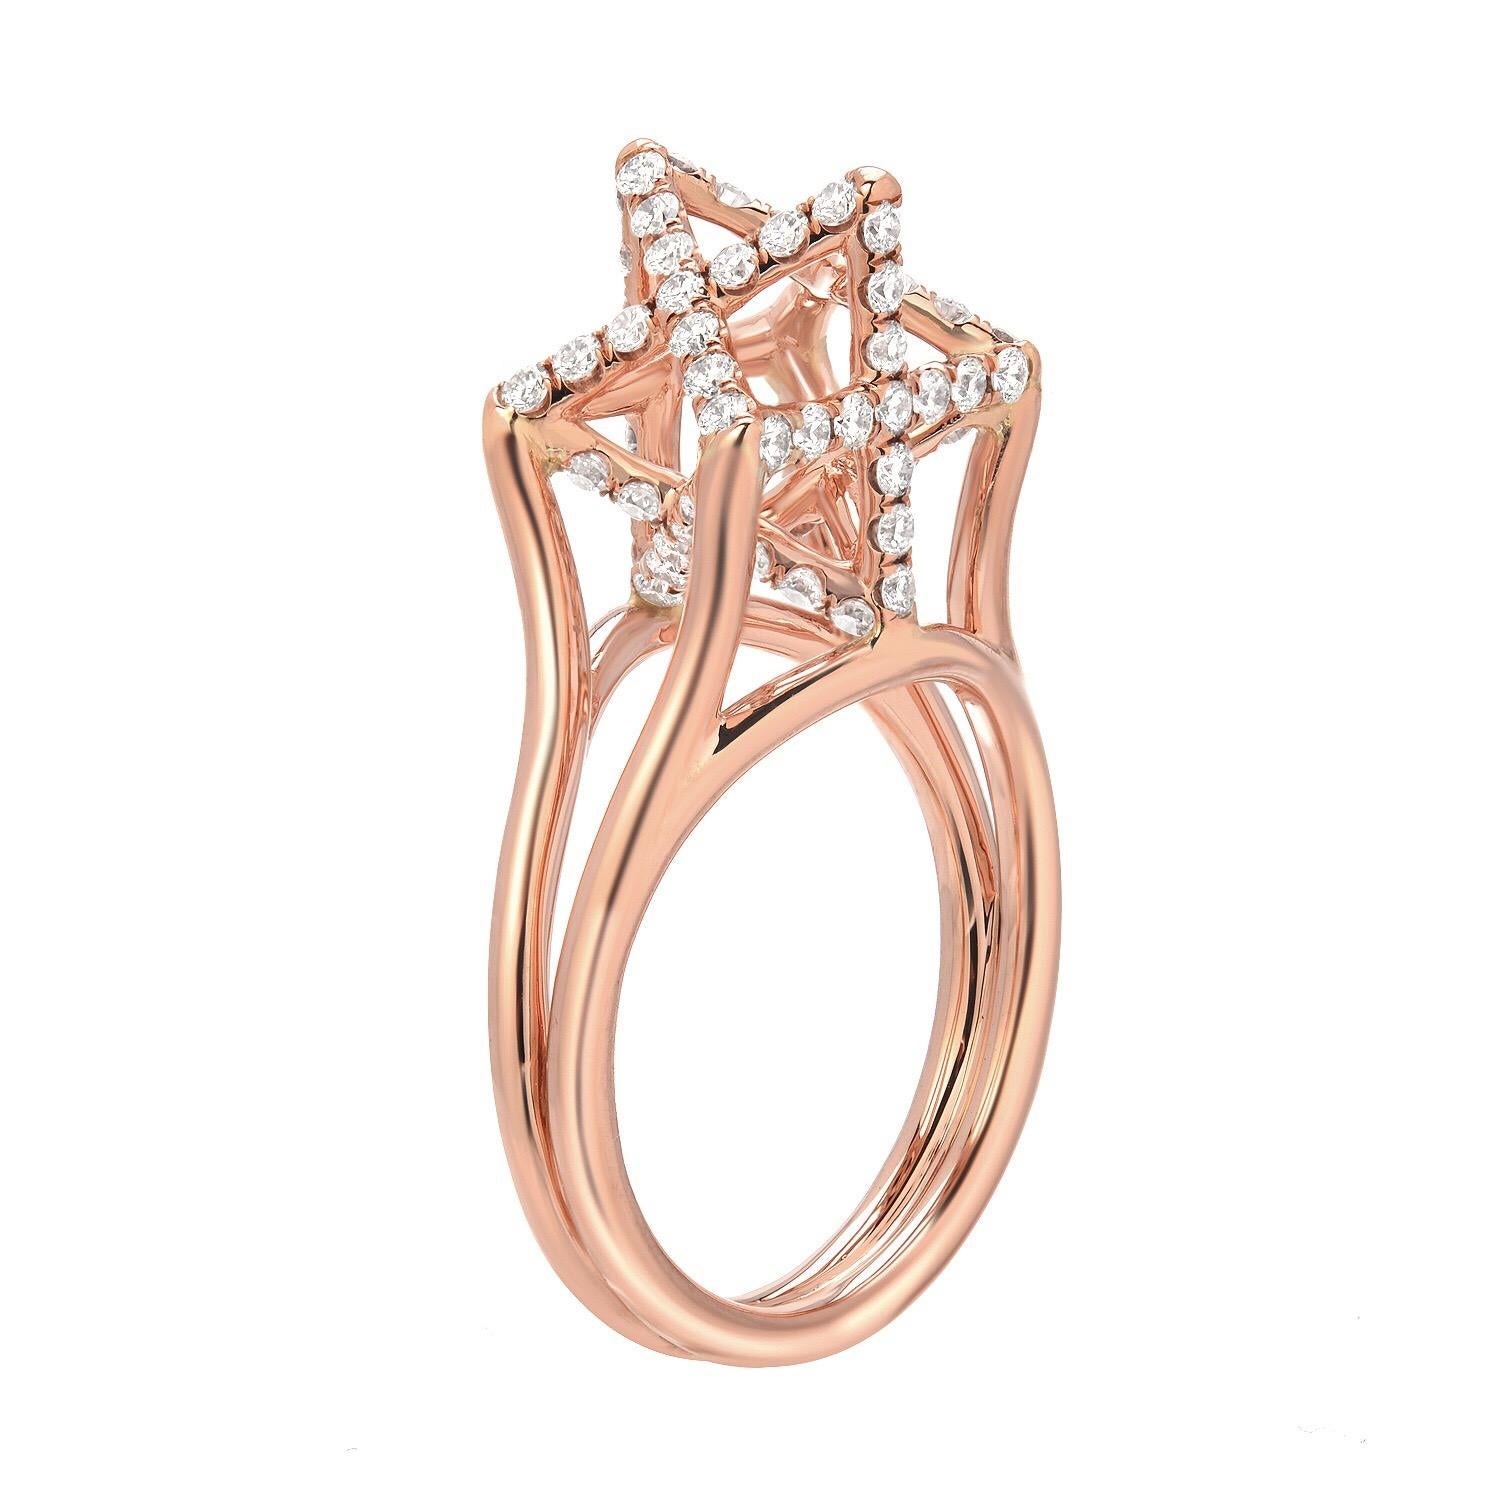 Rose gold diamond ring featuring a Merkaba three dimensional diamond star, totaling approximately 0.98 carats of F-G color and VVS2-VS1 clarity. This diamond rose gold ring showcases a dramatic, sculptural design that extends upward from the hand